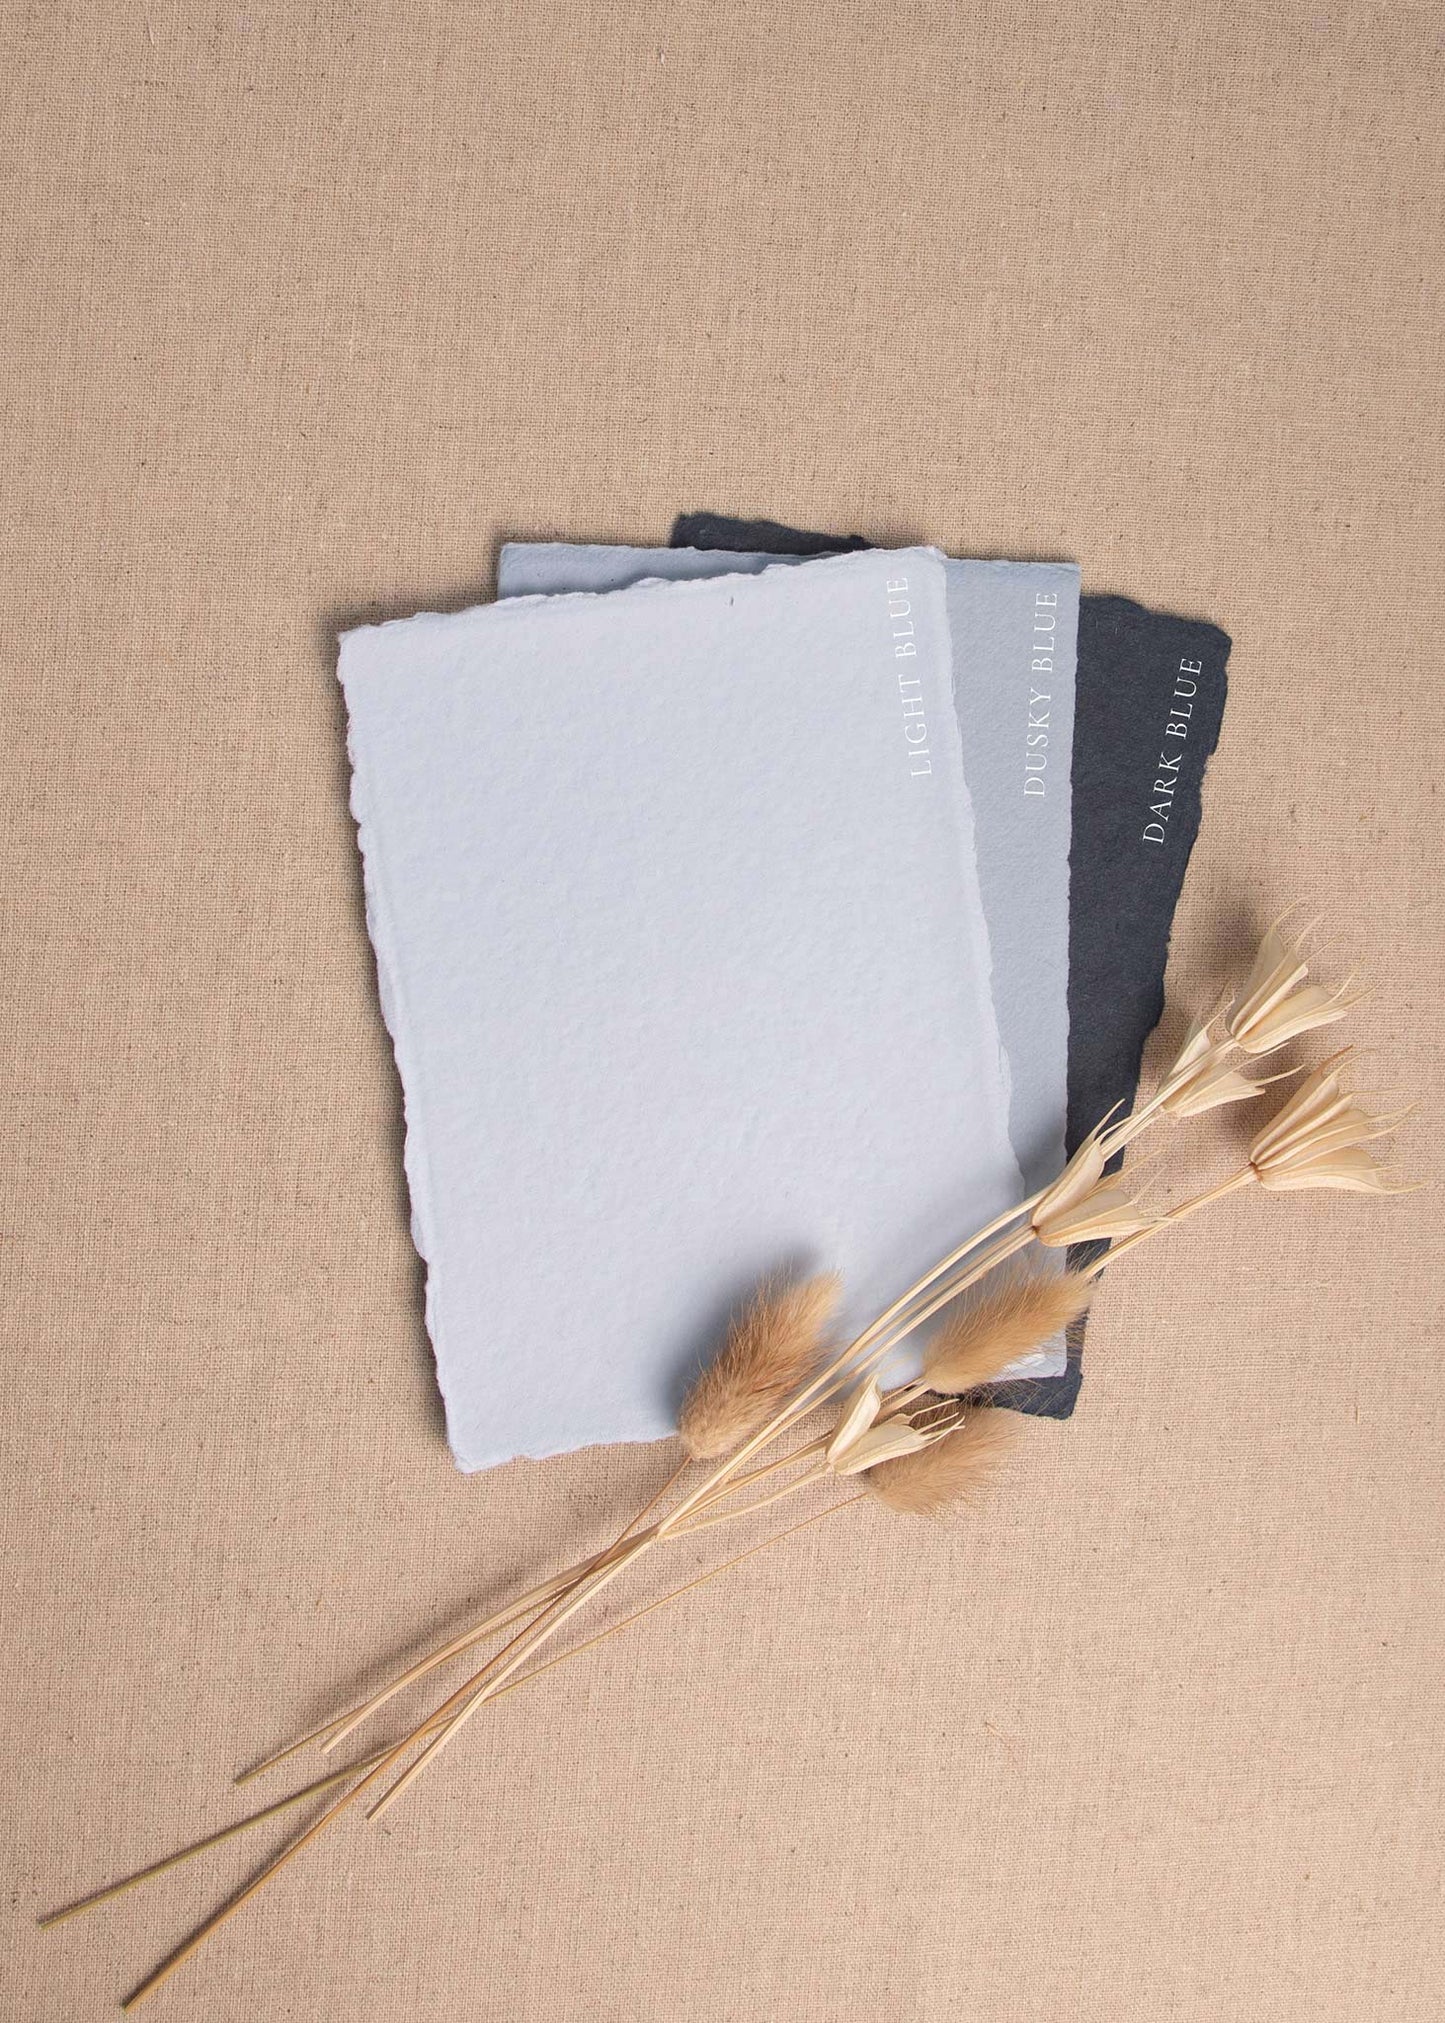 Fanned pile of Light blue, Dusky blue, Dark Blue handmade paper sheets with deckle edge surrounded by dried flowers